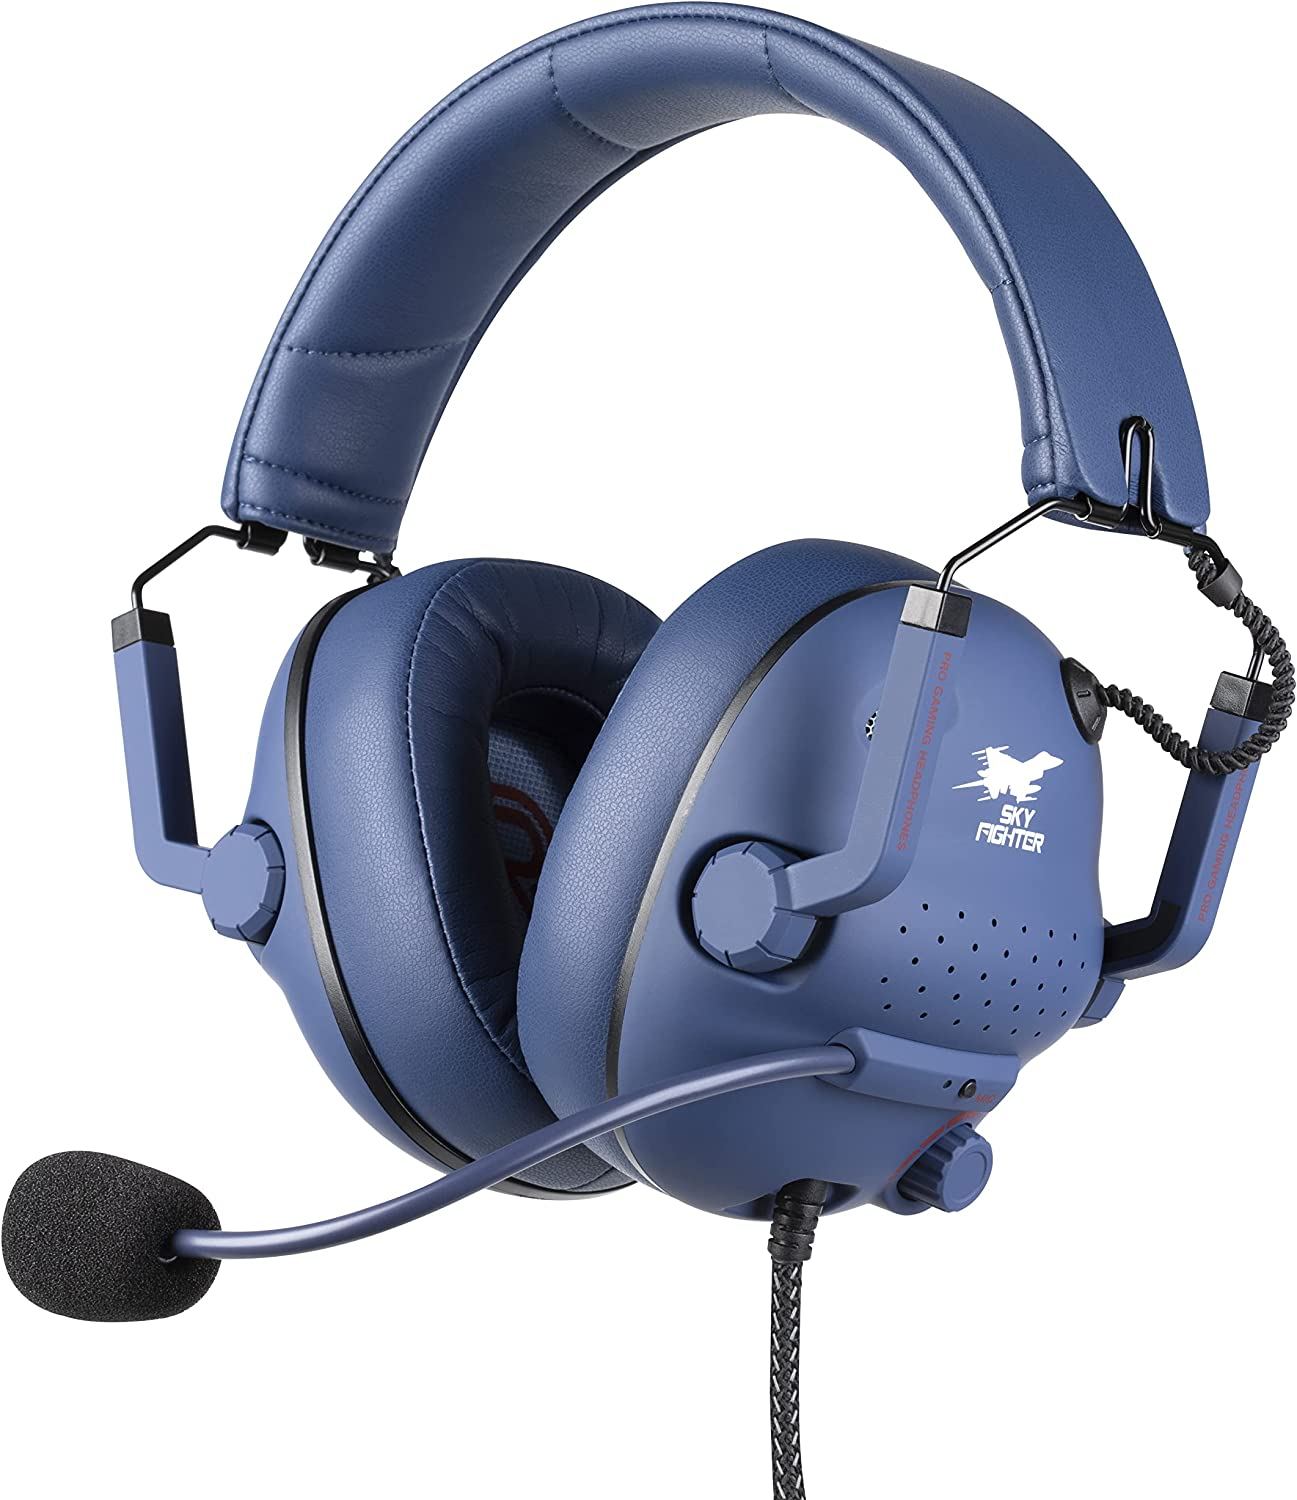 Konix Skyfighter Gaming Headset (Blue) for PC for Windows